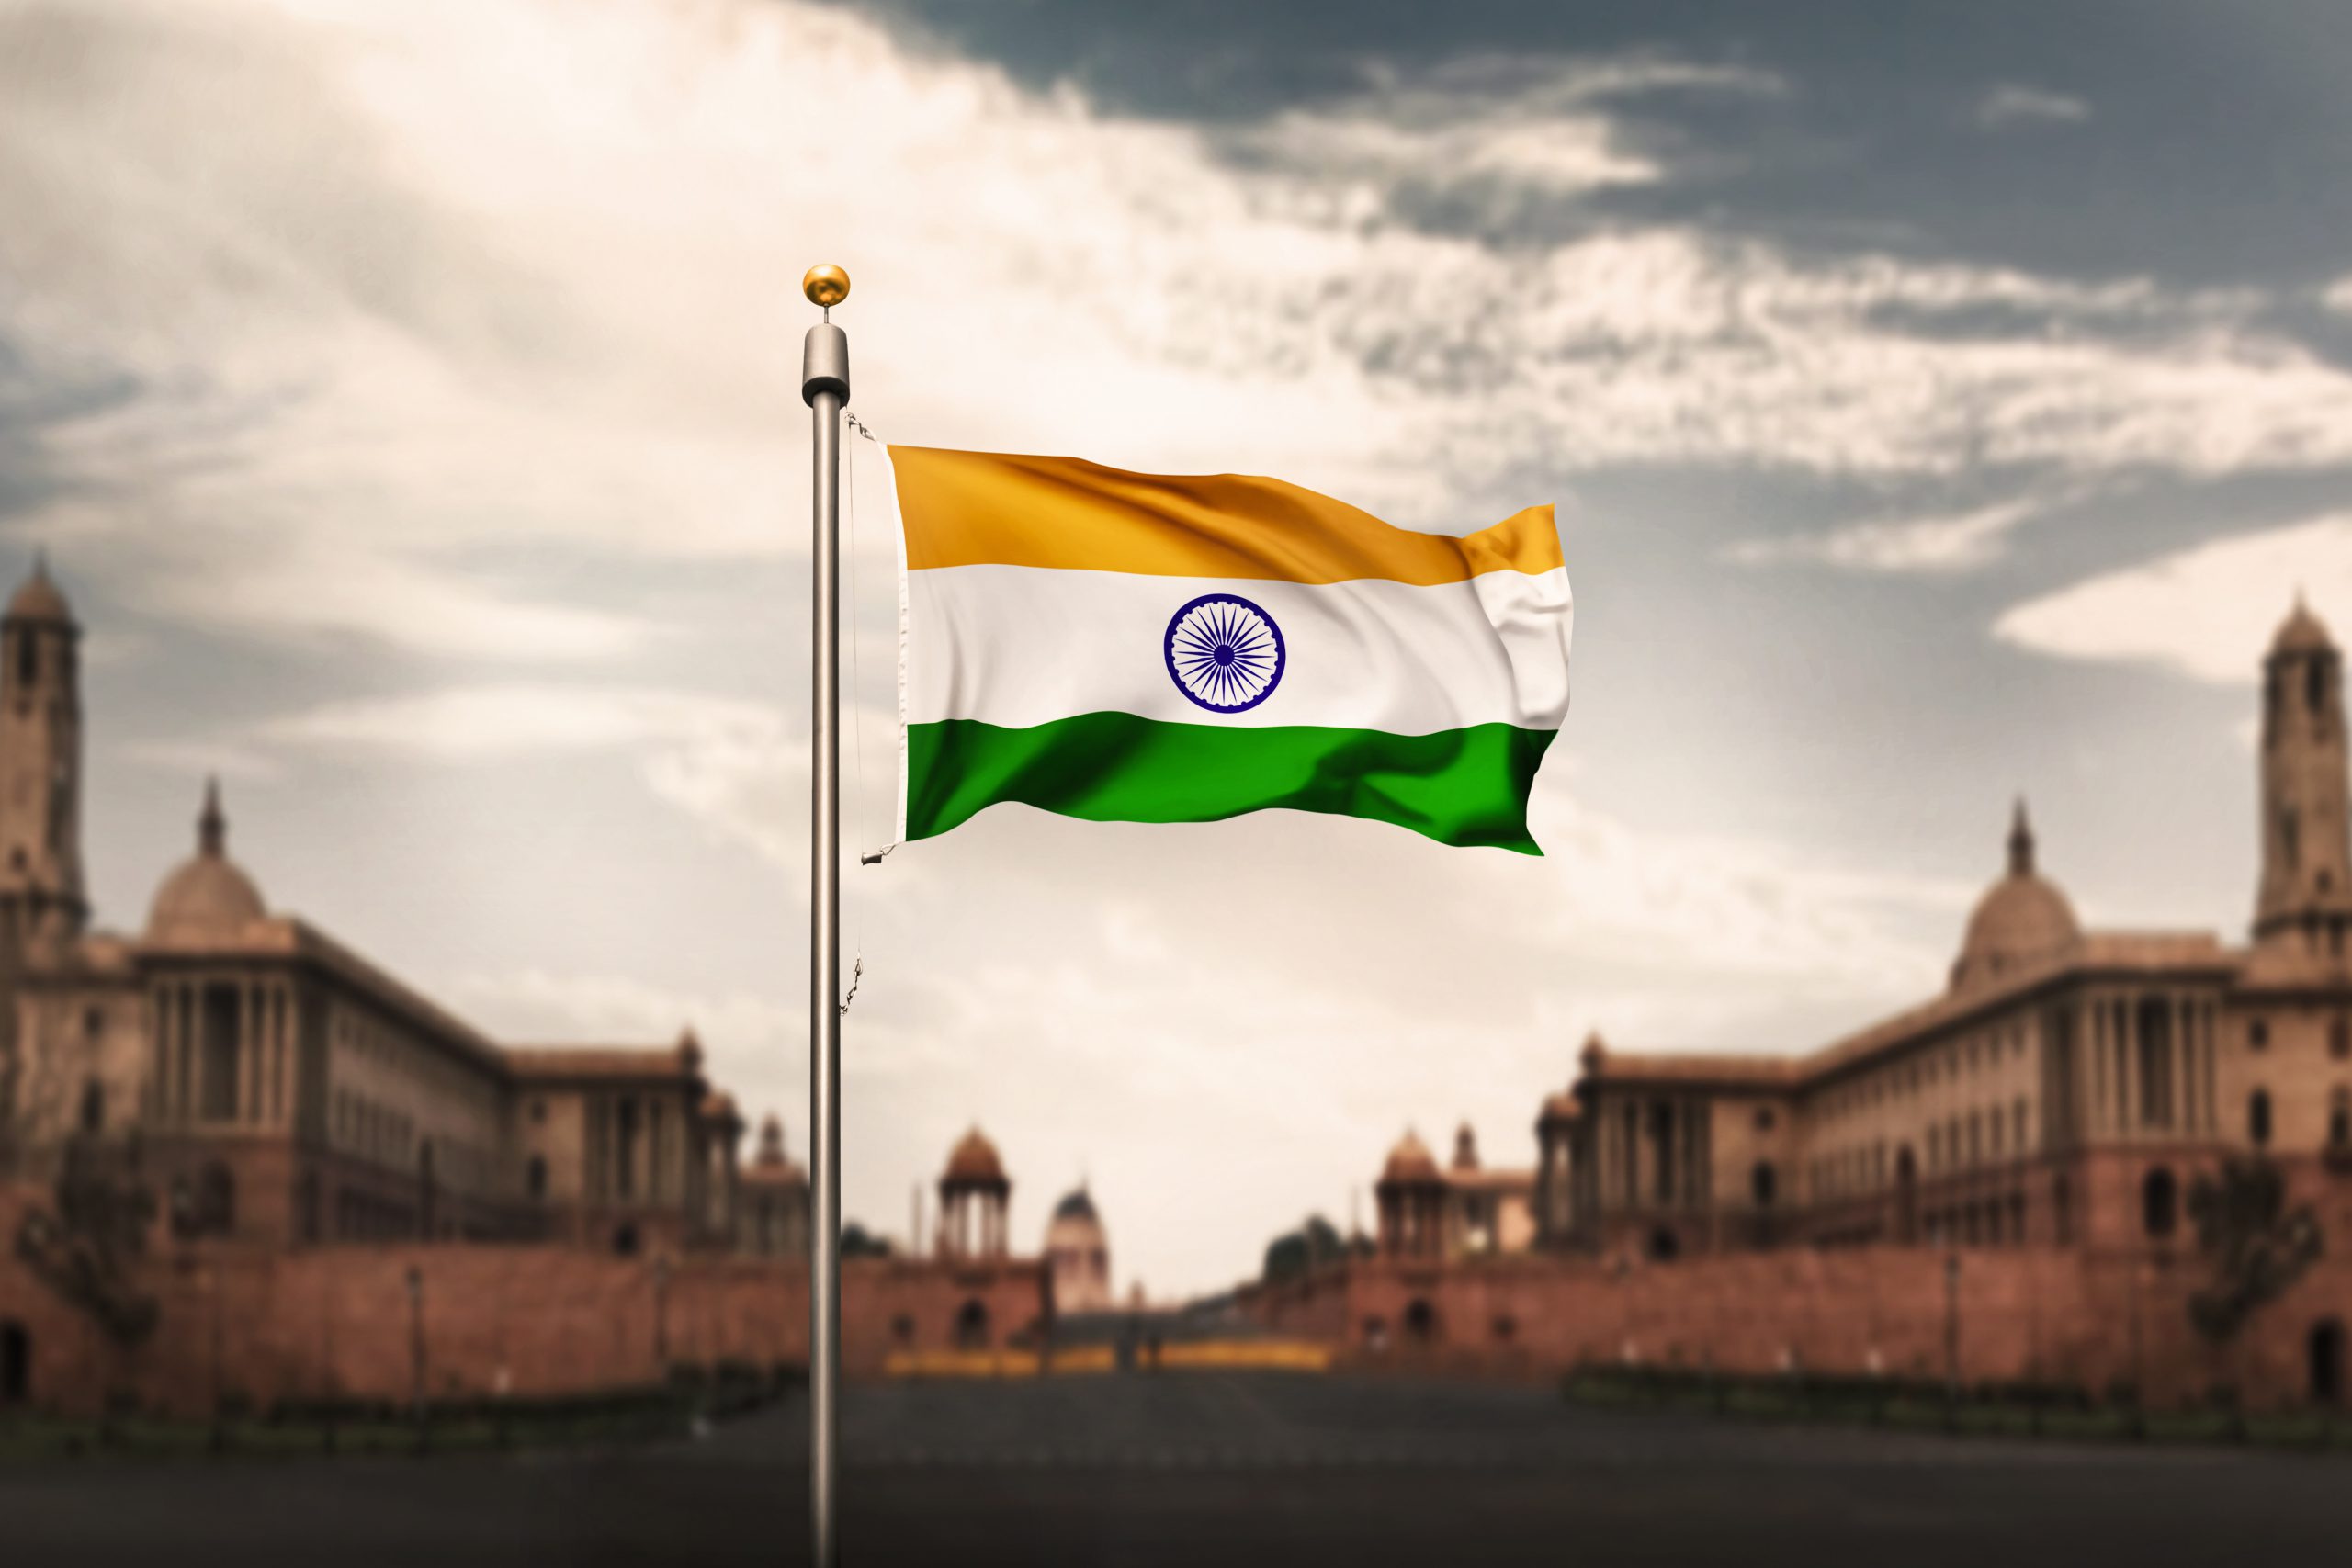 In 2021, more than 7% of the population of India owned digital currencies
